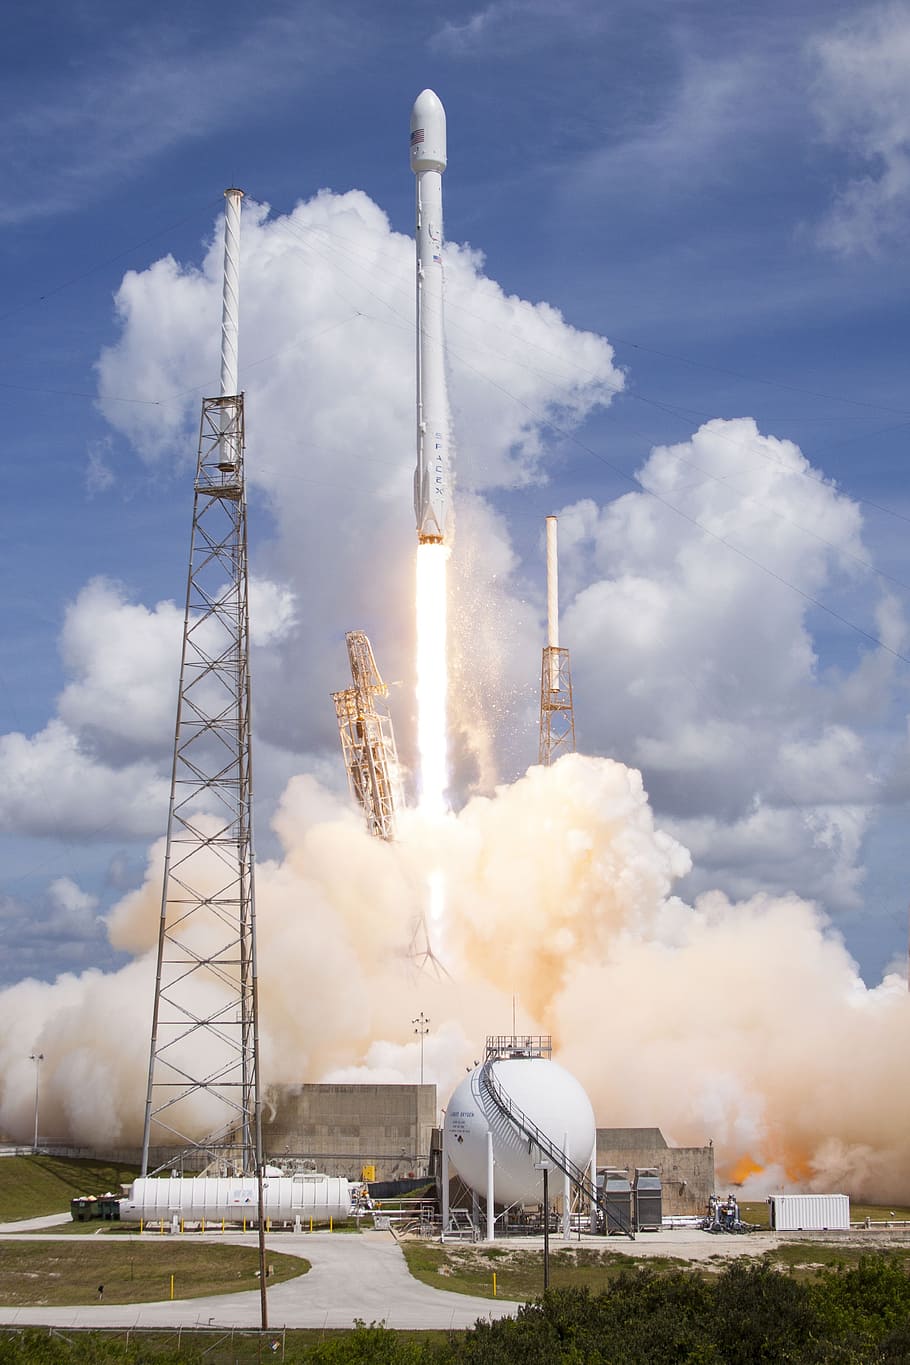 white, space shuttle, taking, docking station, daytime, rocket launch, spacex, lift-off, launch, flames